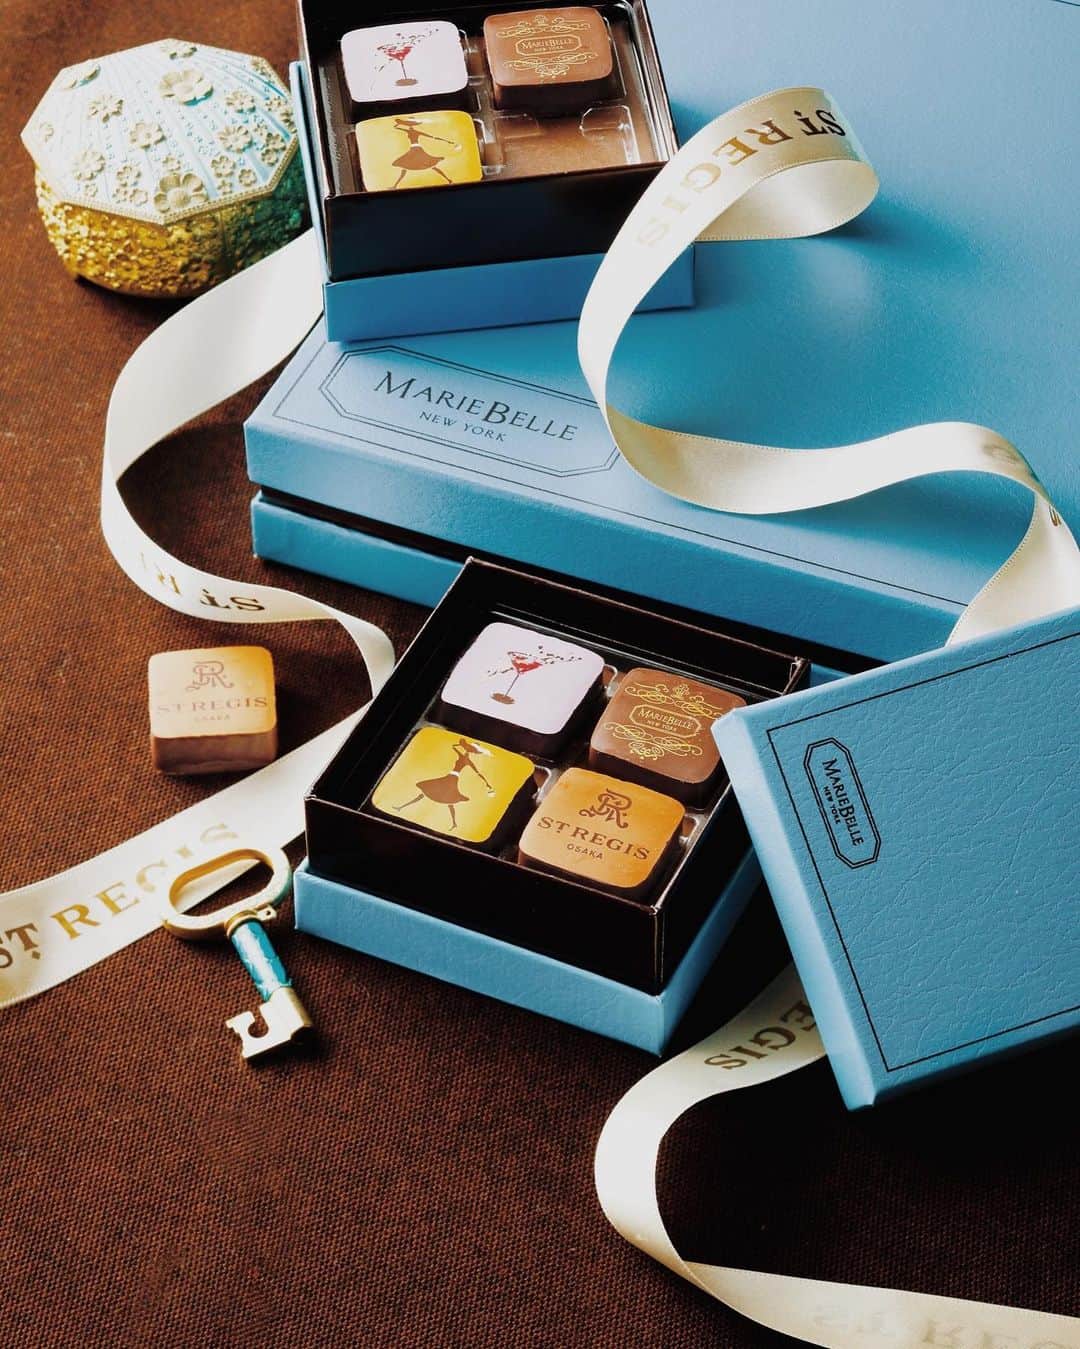 The St. Regis Osakaさんのインスタグラム写真 - (The St. Regis OsakaInstagram)「. MarieBelle Afternoon Tea from 8/1 to 10/30 ㅤㅤㅤㅤㅤㅤㅤㅤㅤㅤㅤ ニューヨーク生まれの セント レジス ホテル 大阪では、 ホテルとしては世界初となる マリベル @mariebelle_japan との 特別なコラボレーションを実現しました。  同じくNY発のマリベルが セント レジス ホテル大阪だけのために 考案したアフタヌーンティーメニューを 期間限定でご提供いたします。  Indulge in exclusive Chocolate Afternoon Tea featuring MarieBelle New York ㅤㅤㅤㅤㅤㅤㅤㅤㅤㅤㅤ MarieBelle Afternoon Tea from 8/1 to 10/30 ㅤㅤㅤㅤㅤㅤㅤㅤㅤㅤㅤ The St. Regis Osaka is delighted to announce the collaboration with MarieBelle, one of the most renowned dessert company in the world. ㅤㅤㅤㅤㅤㅤㅤㅤㅤㅤㅤ In celebration of their first collaboration with a luxury brand hotel such as The St. Regis, MarieBelle has created an exclusive Afternoon Tea menu featuring delectable chocolates for our luminaries (Limited time only). ㅤㅤㅤㅤㅤㅤㅤㅤㅤㅤㅤ @mariebelle_japan  #StRegis #LiveExquisite #MarriottBonvoy #stregisosaka #osaka #travelgram #travelphotography #luxuryhotel  #osakatravel #osakafood #osakagurmet #afternoontea #teatime #mariebelle  #mariebellejapan #chocolate #sweets #angle」7月5日 20時01分 - stregisosaka